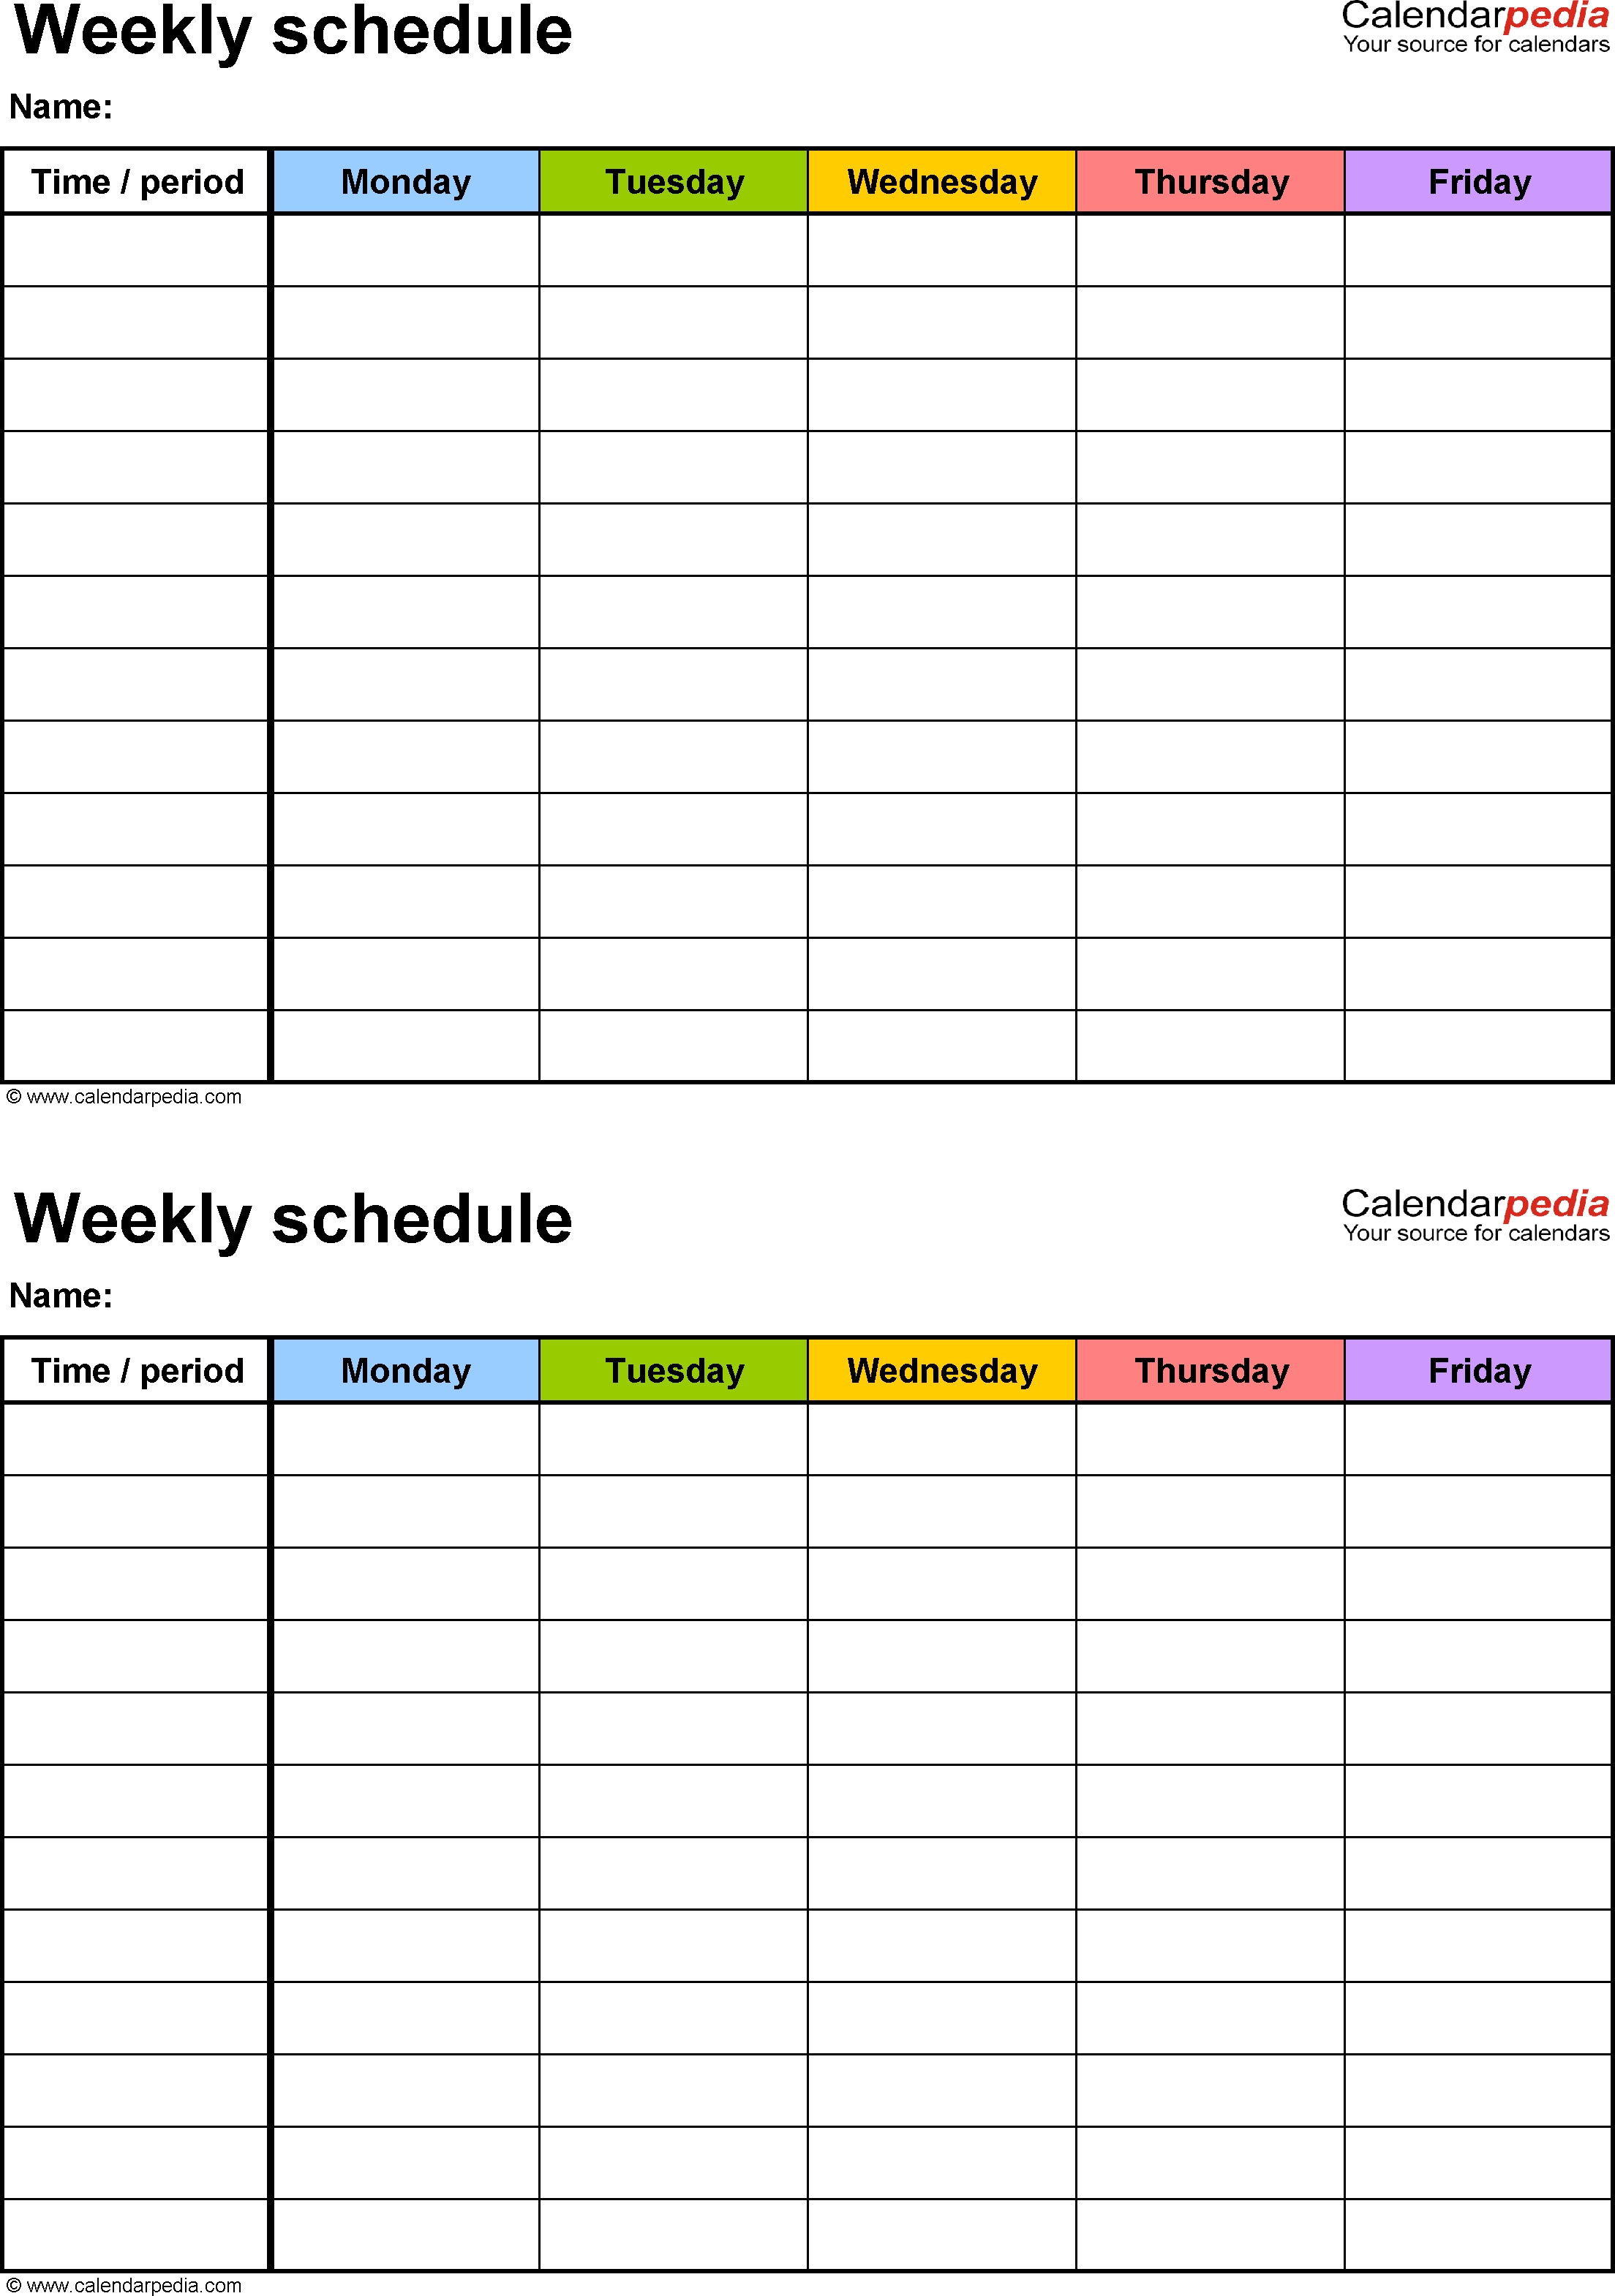 Free Weekly Schedule Templates For Pdf - 18 Templates-Blank Monday Through Friday Pdf